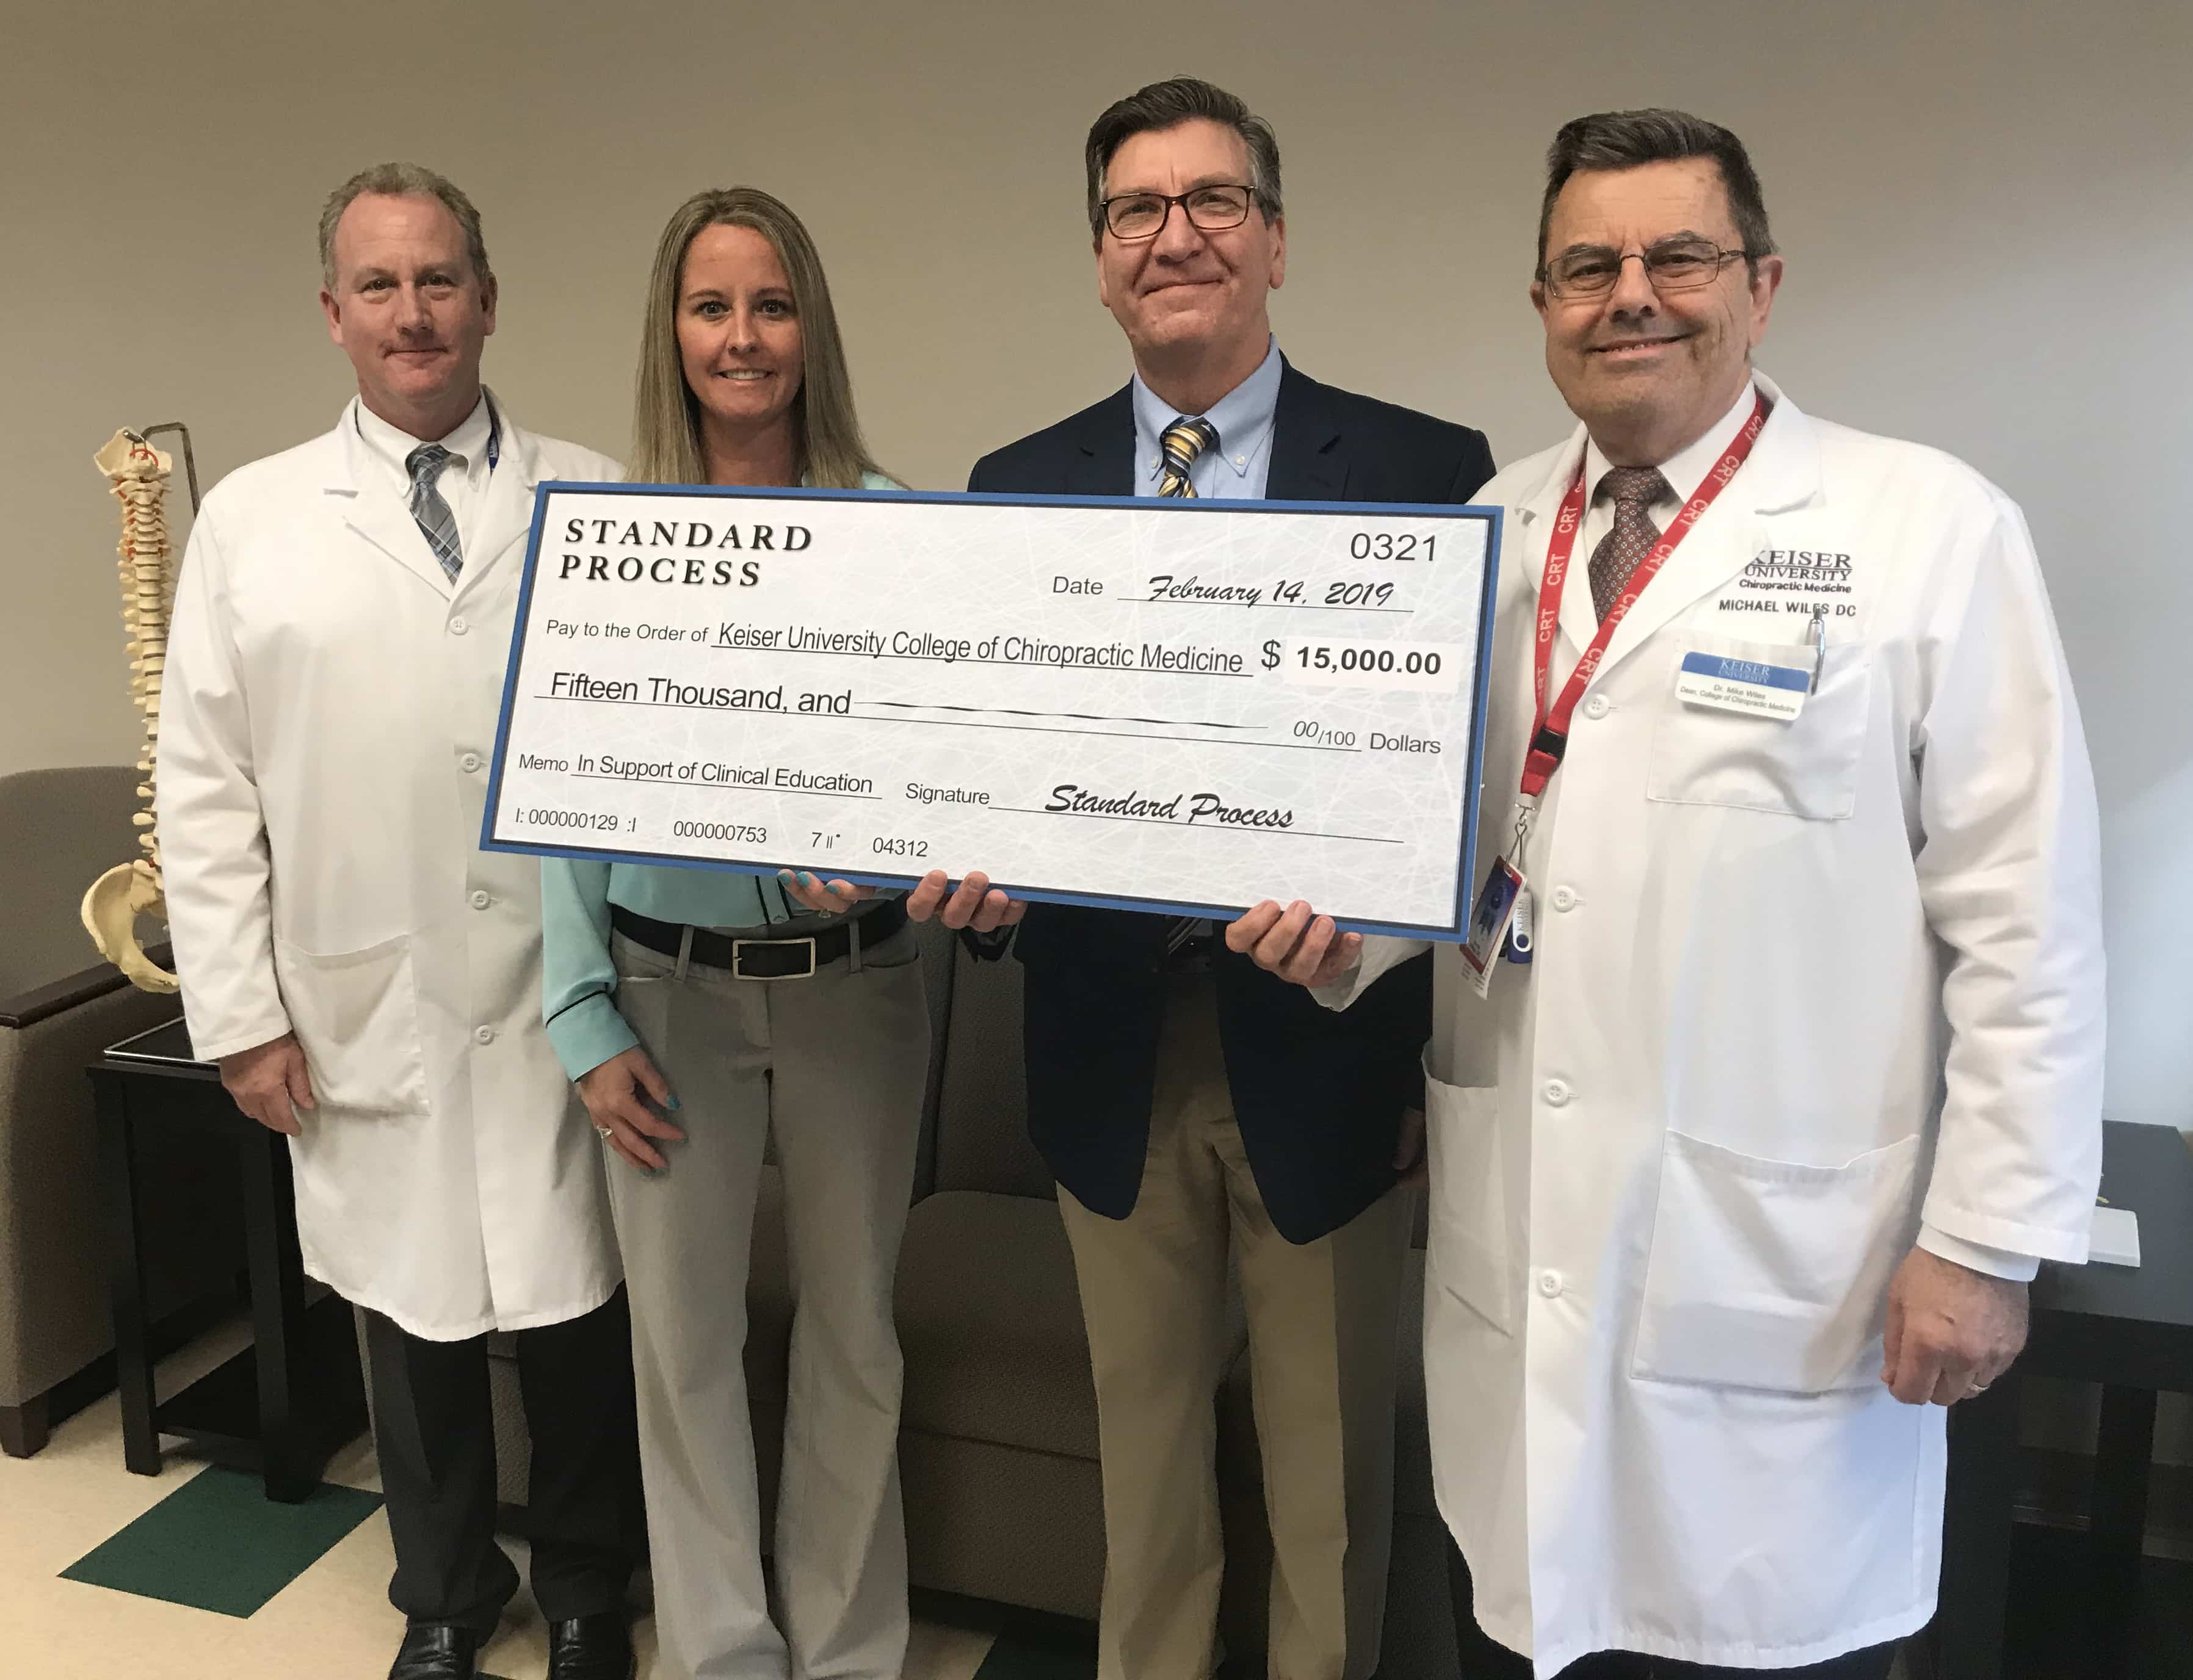 Keiser University’s College of Chiropractic Medicine Is Presented $15K Donation by Standard Process, Inc.